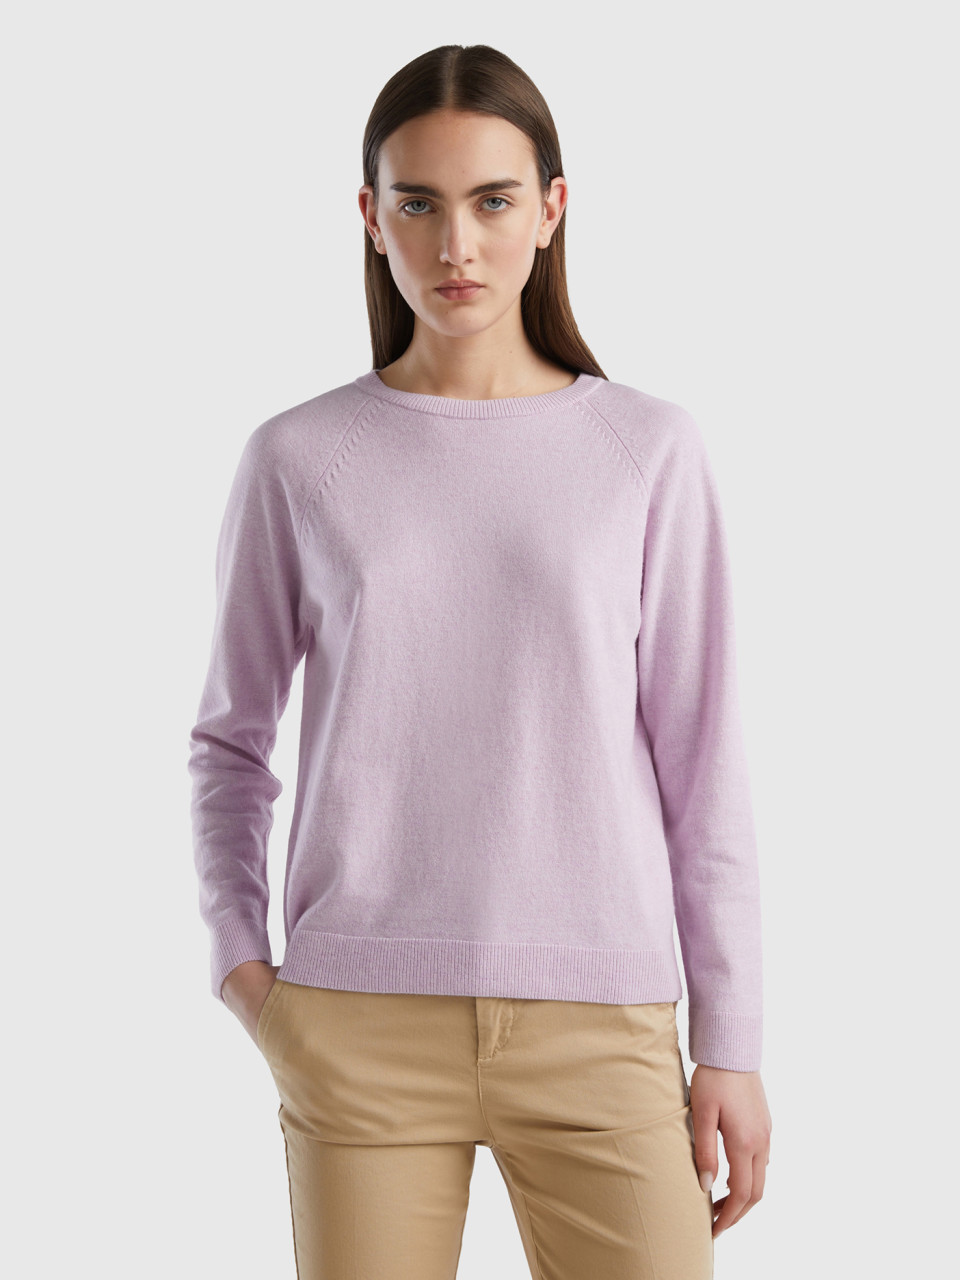 Benetton, Light Lilac Crew Neck Sweater In Cashmere And Wool Blend, Lilac, Women